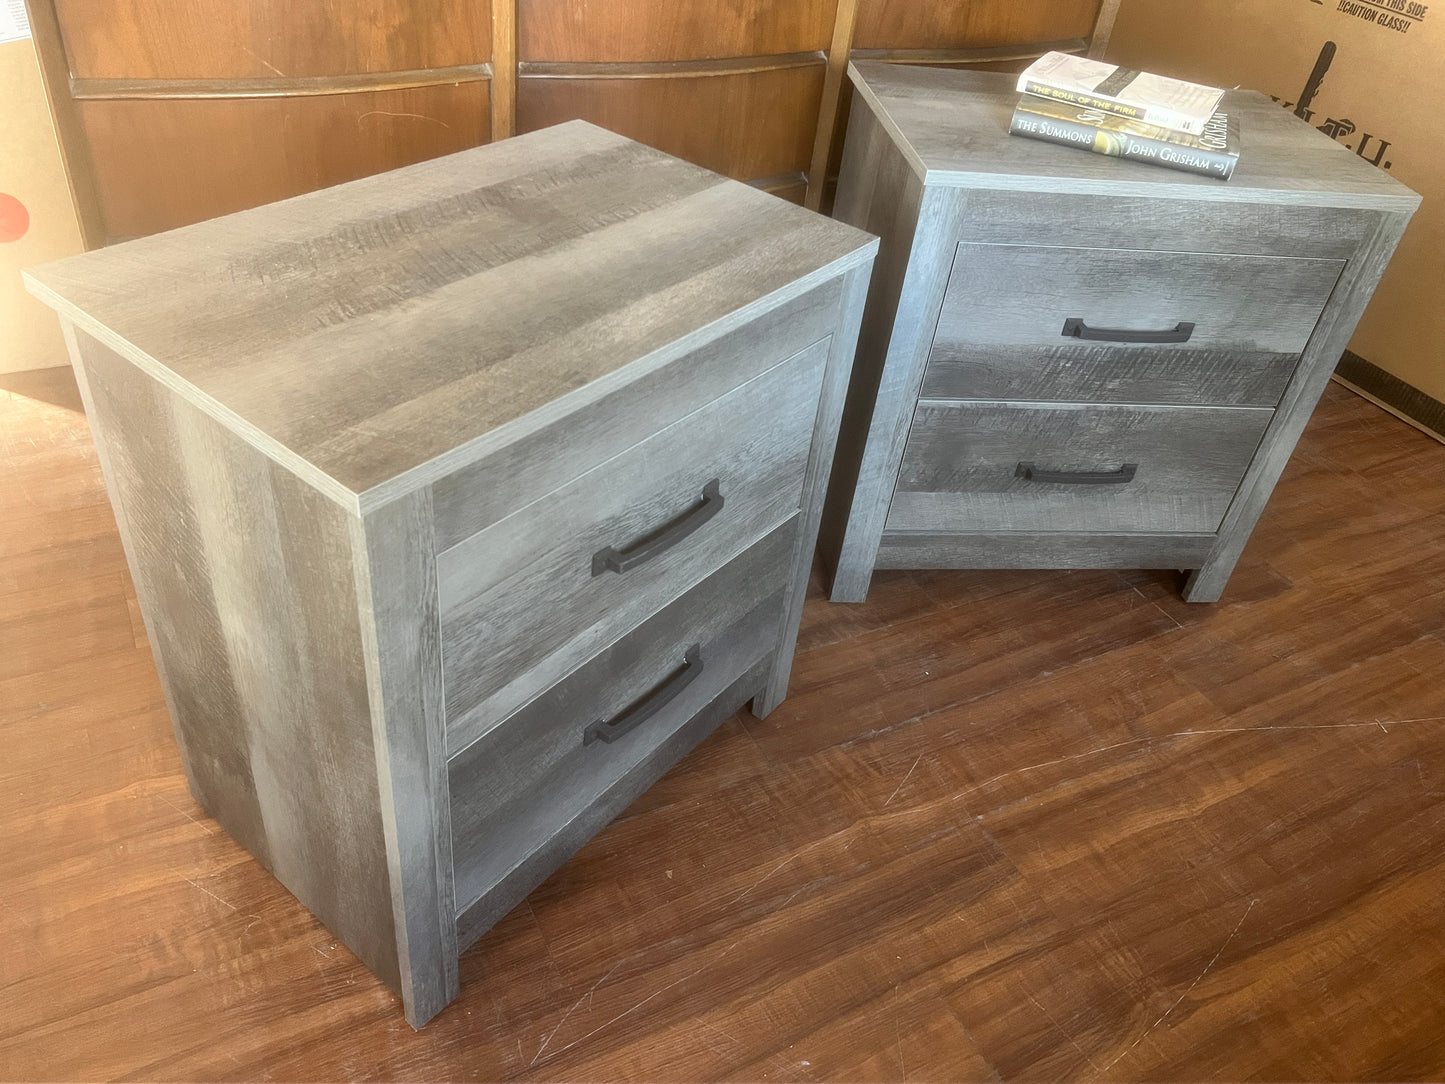 Pair of Brand new, Grey, Pre-assembled, Made in USA, two drawer night stands